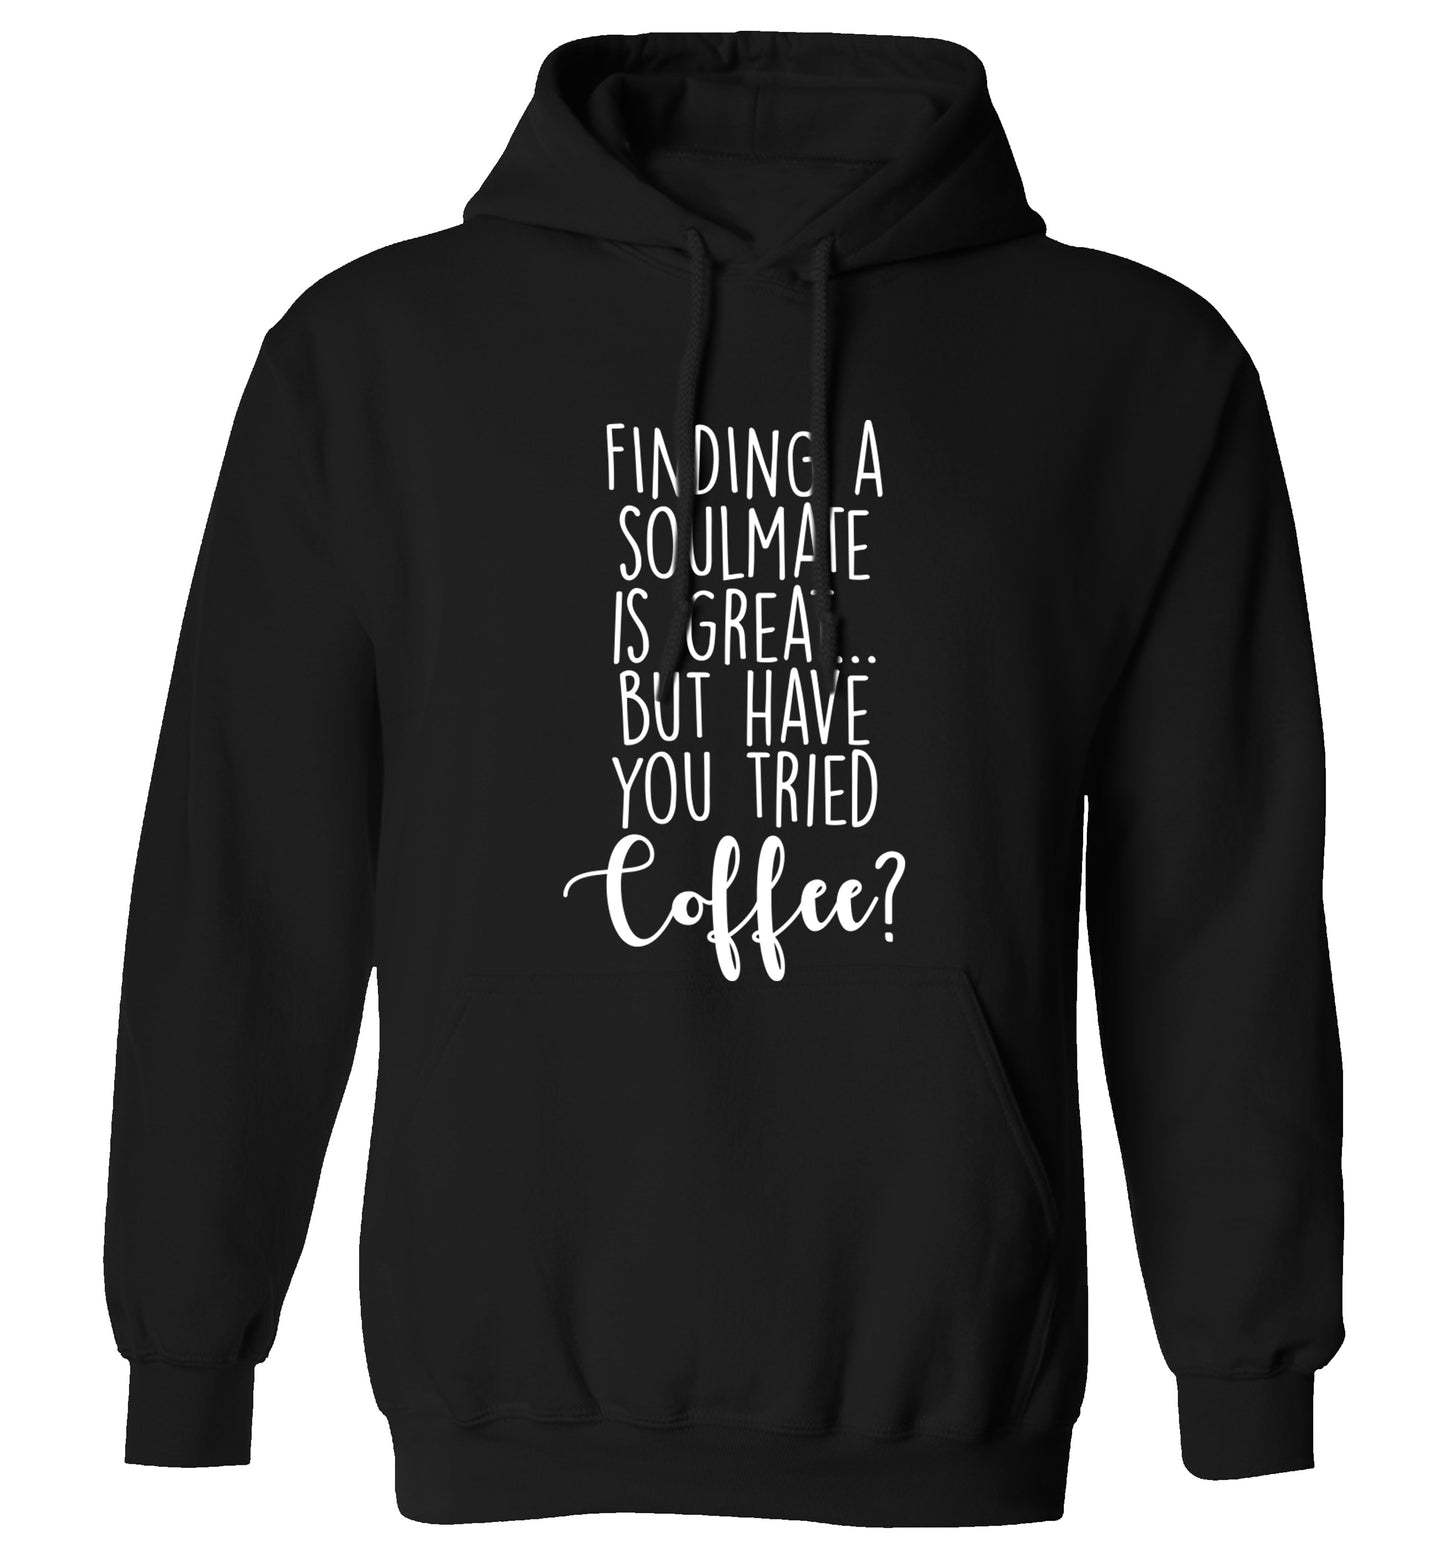 Finding a soulmate is great but have you tried coffee? adults unisex black hoodie 2XL